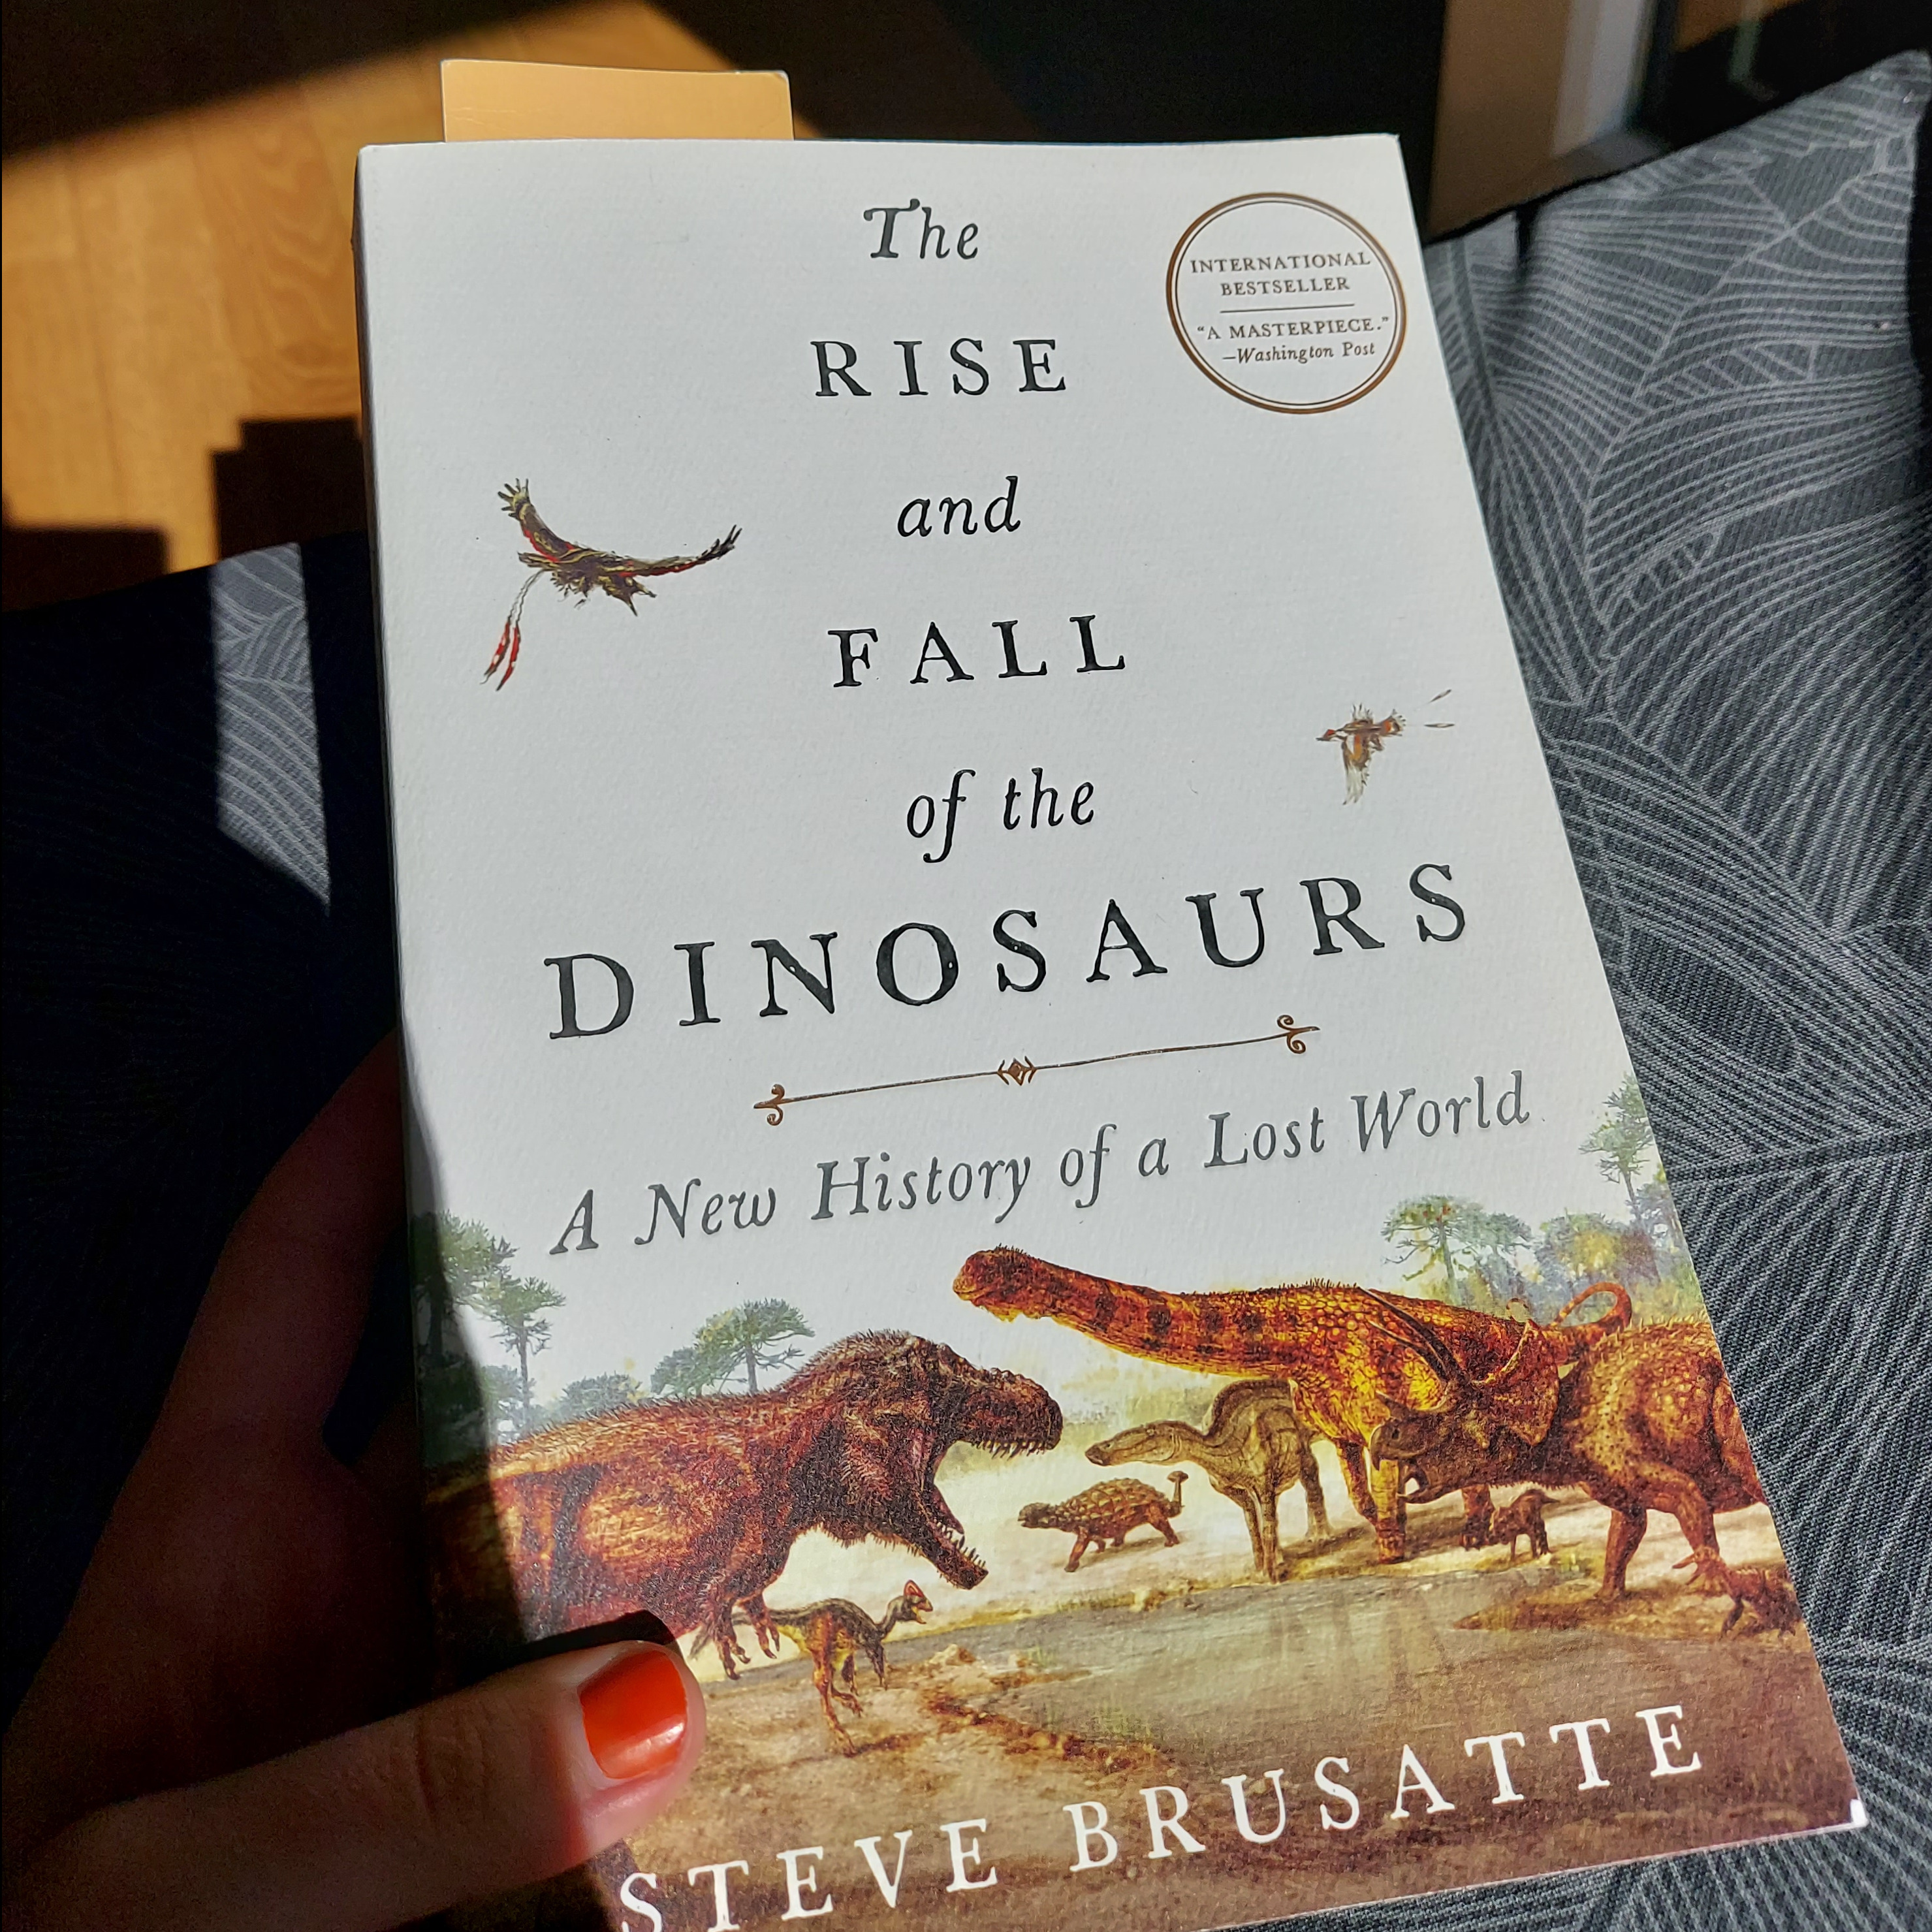 Me holding a book. It's 'The Rise and Fall of the Dinosaurs' by Steve Brusatte.